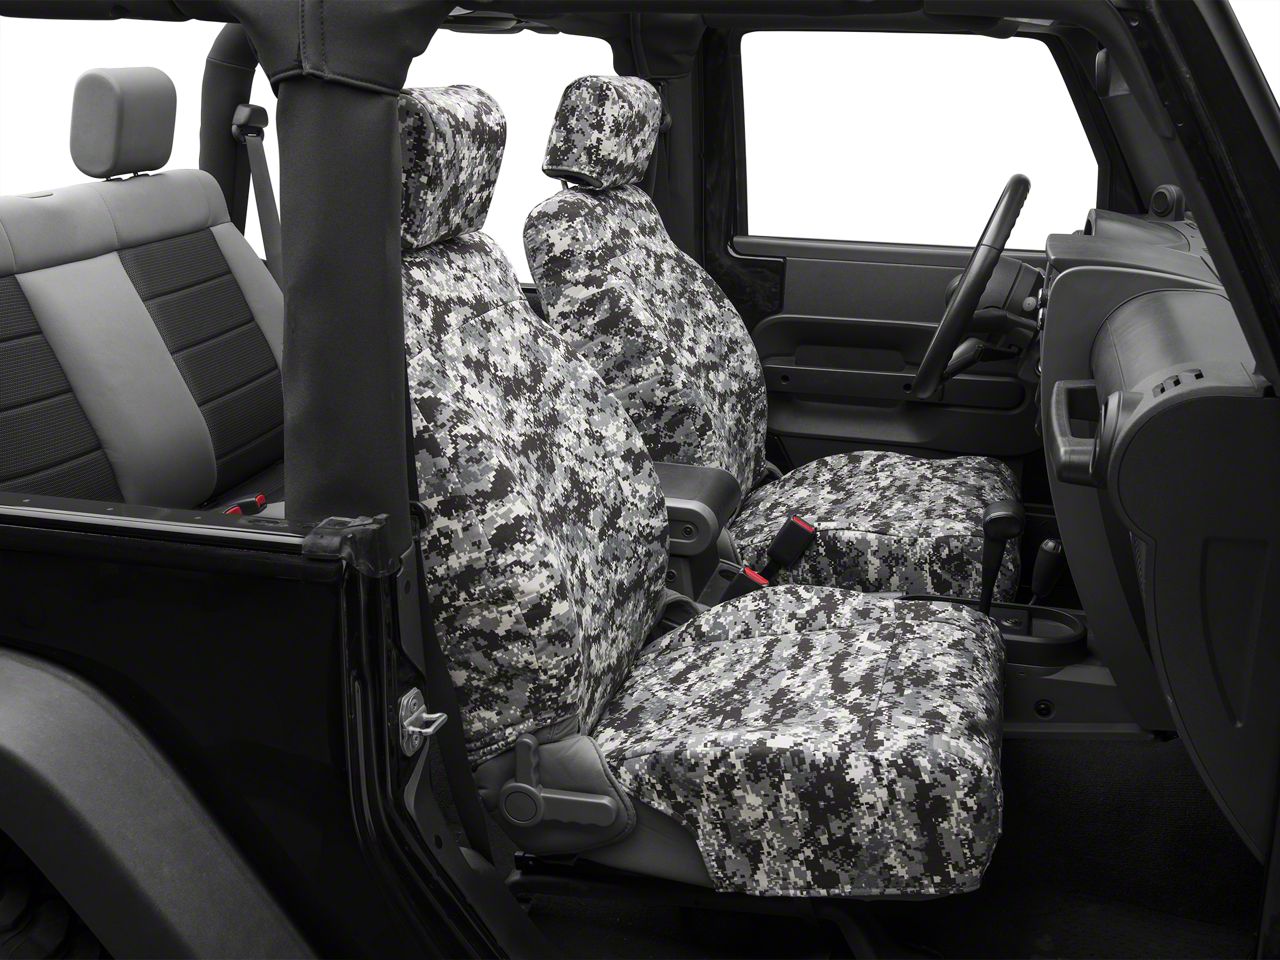 Jeep Wrangler Urban Camouflage Front Seat Covers W Airbags 07 10 Jk 2 Door - Camo Seat Covers For 1997 Jeep Wrangler